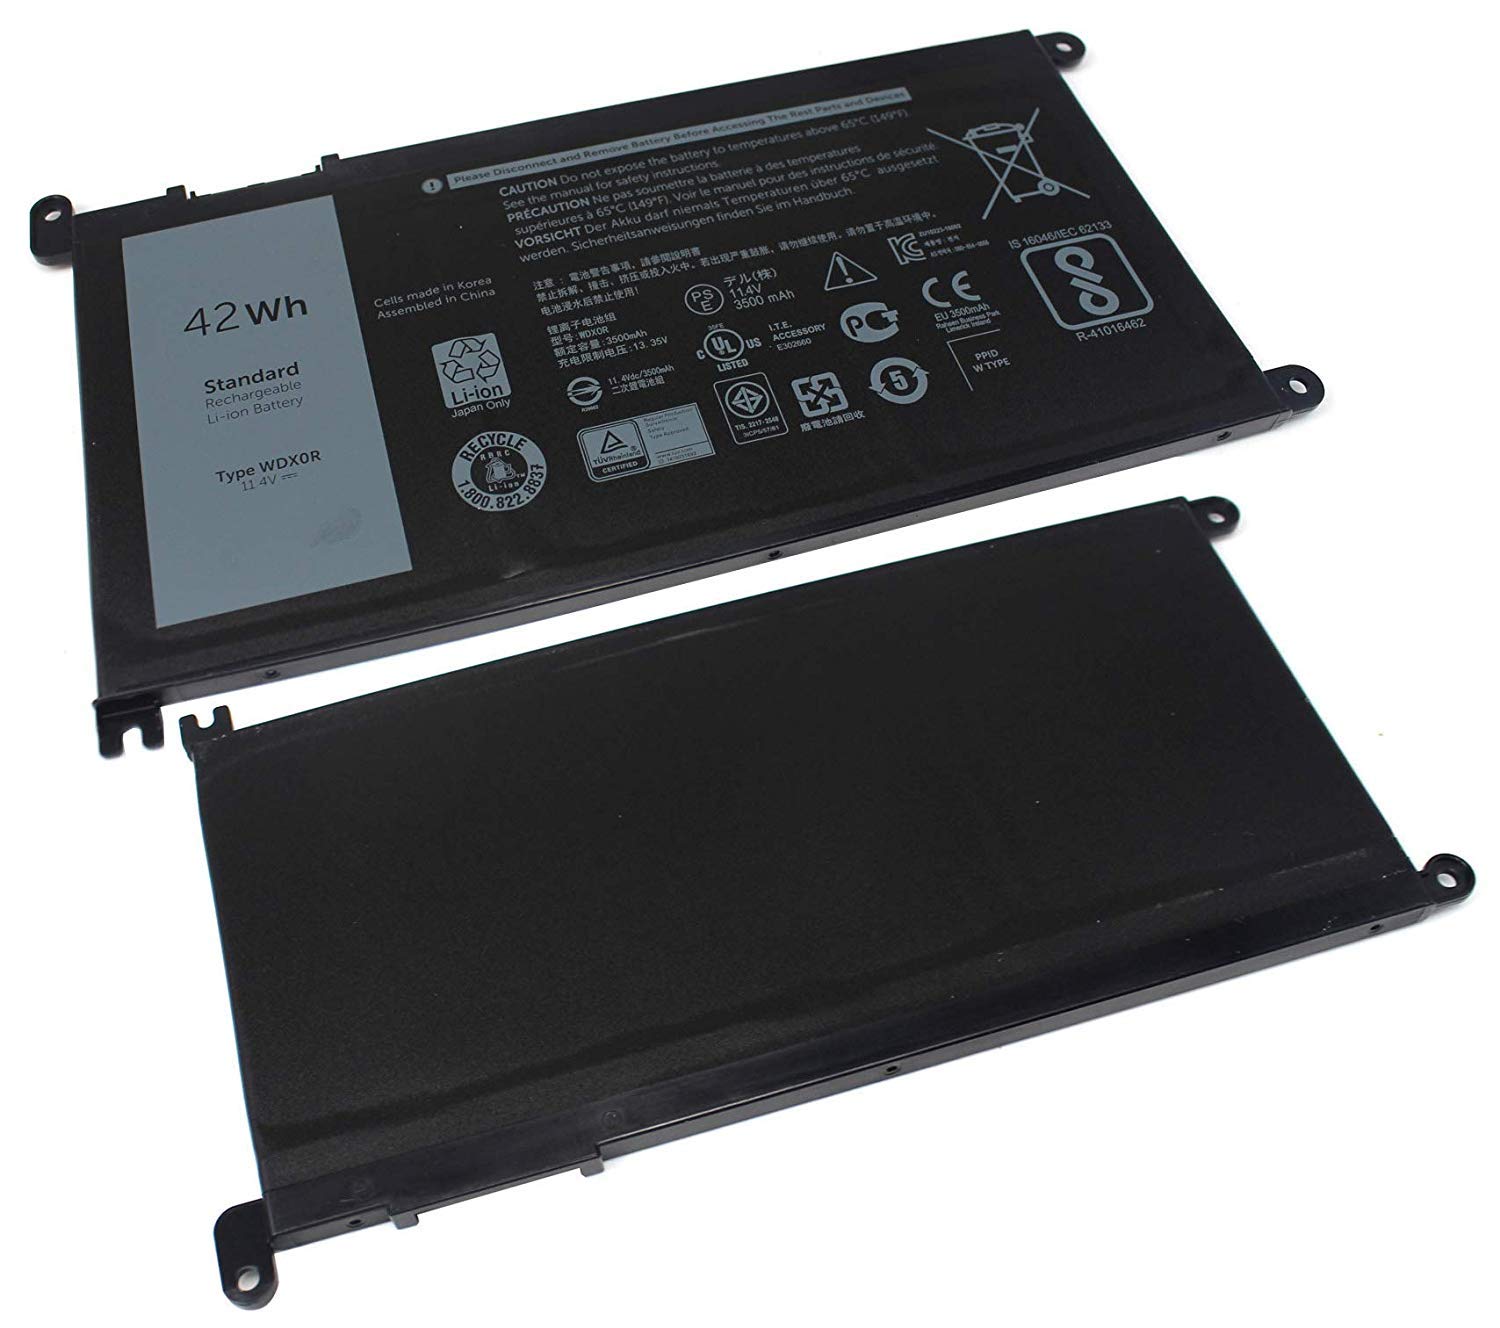 11.4V 42Wh WDX0R WDXOR T2JX4 Battery Compatible with DELL Inspiron 15 5568/13 7368 3crh3 I7368-0027 Laptop